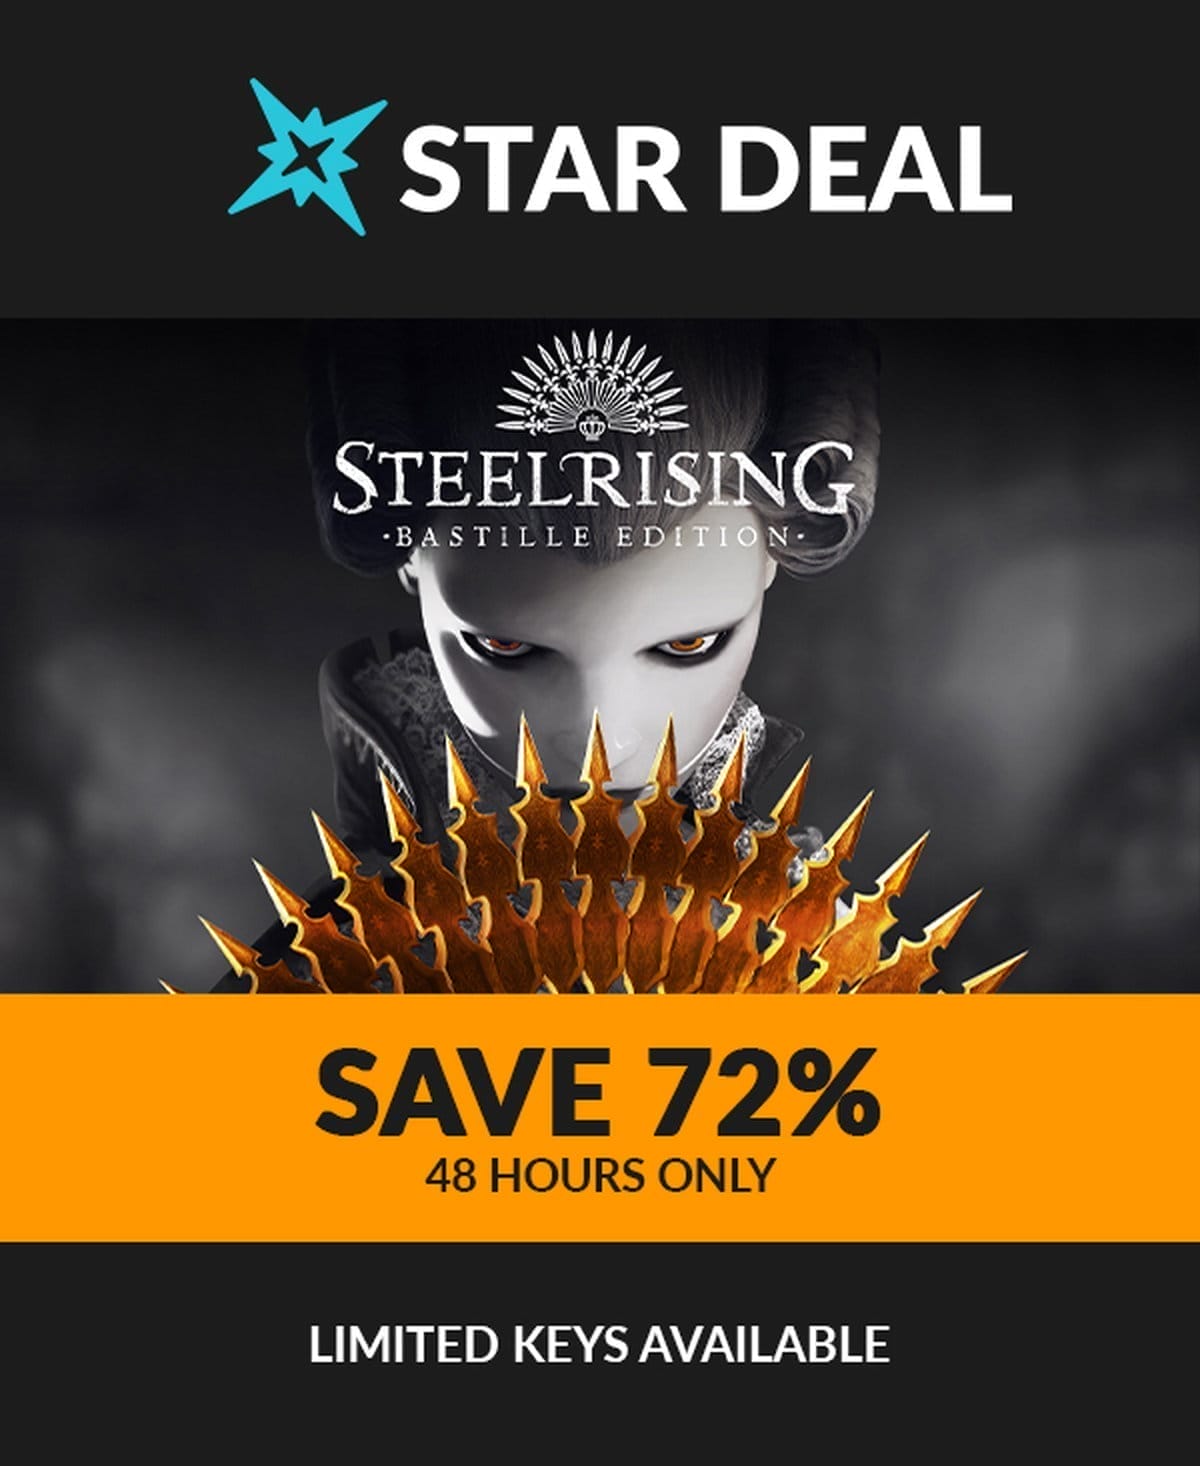 Star Deal! Steelrising - Bastille Edition. Save 72% for the next 48 hours only! Limited keys available